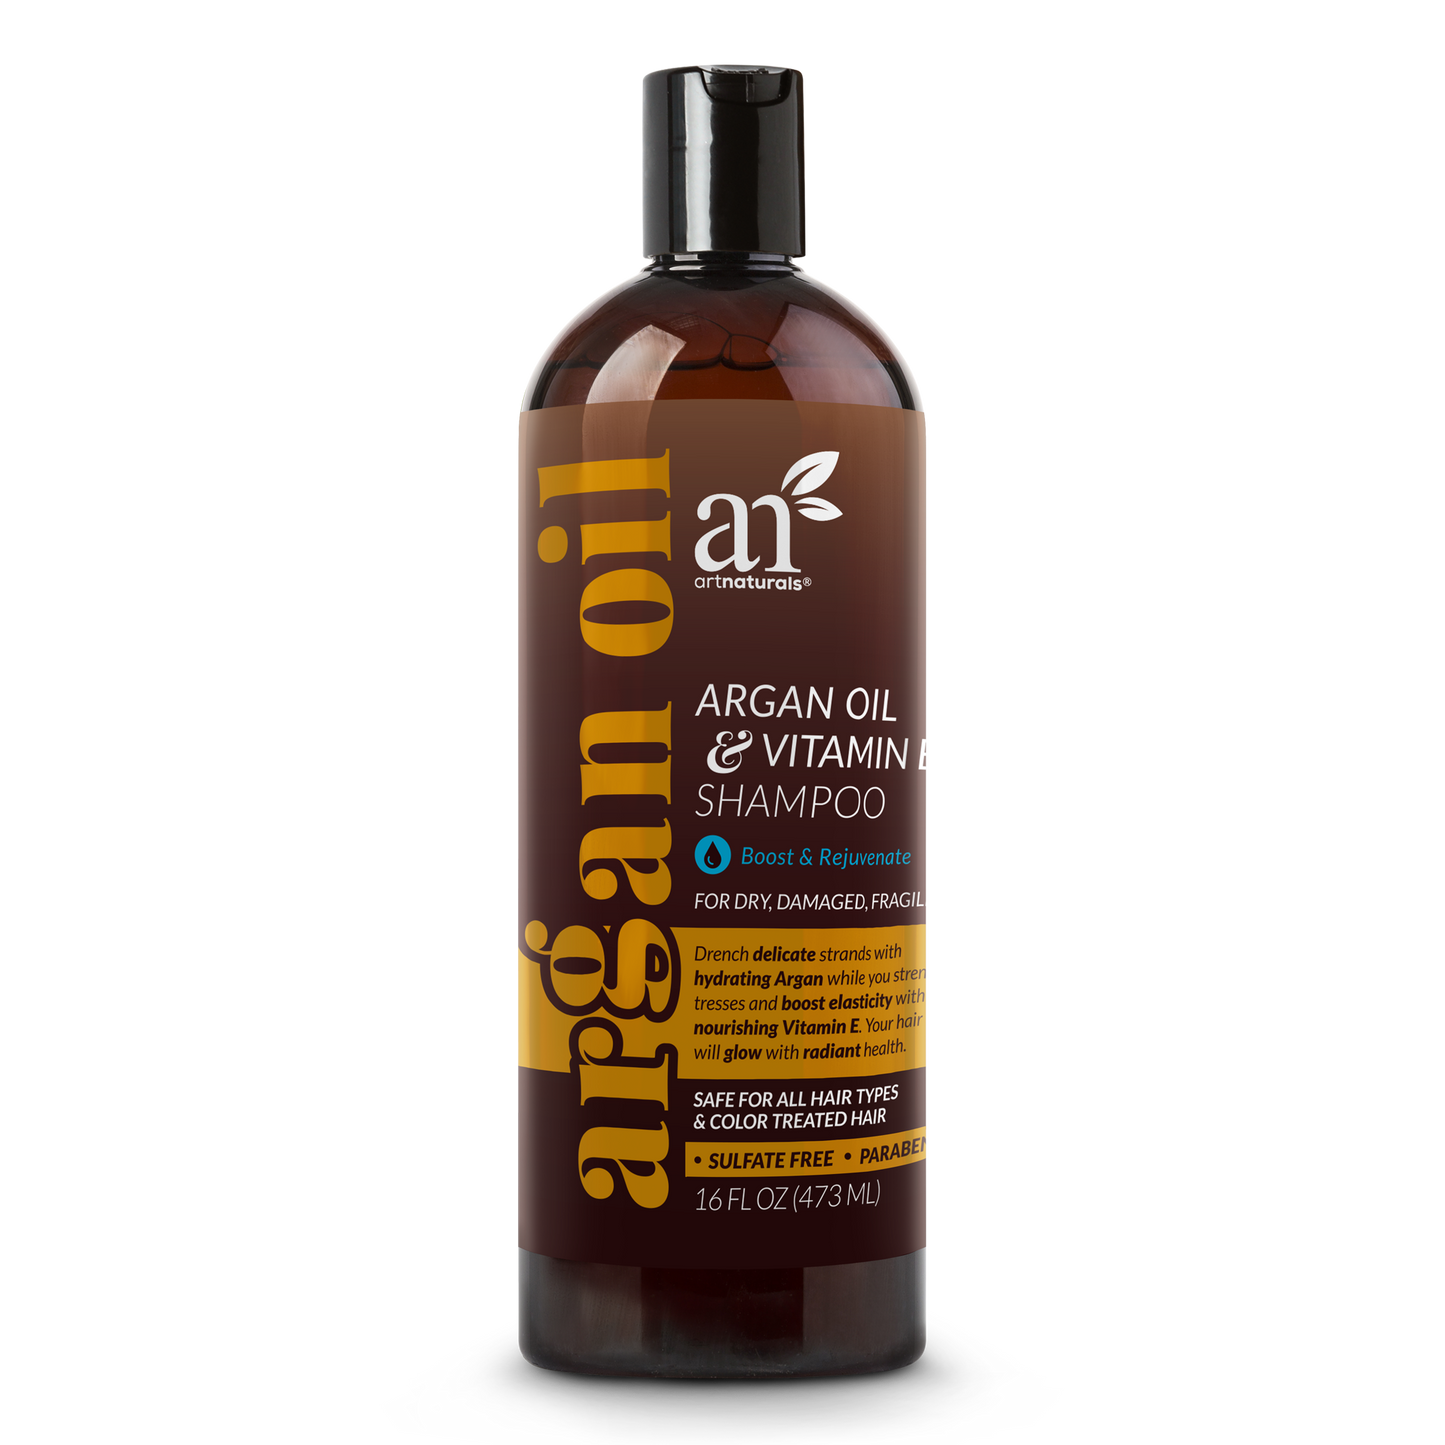 Morrocan Argan oil & Olive Oil Hair Growth therapy Shampoo